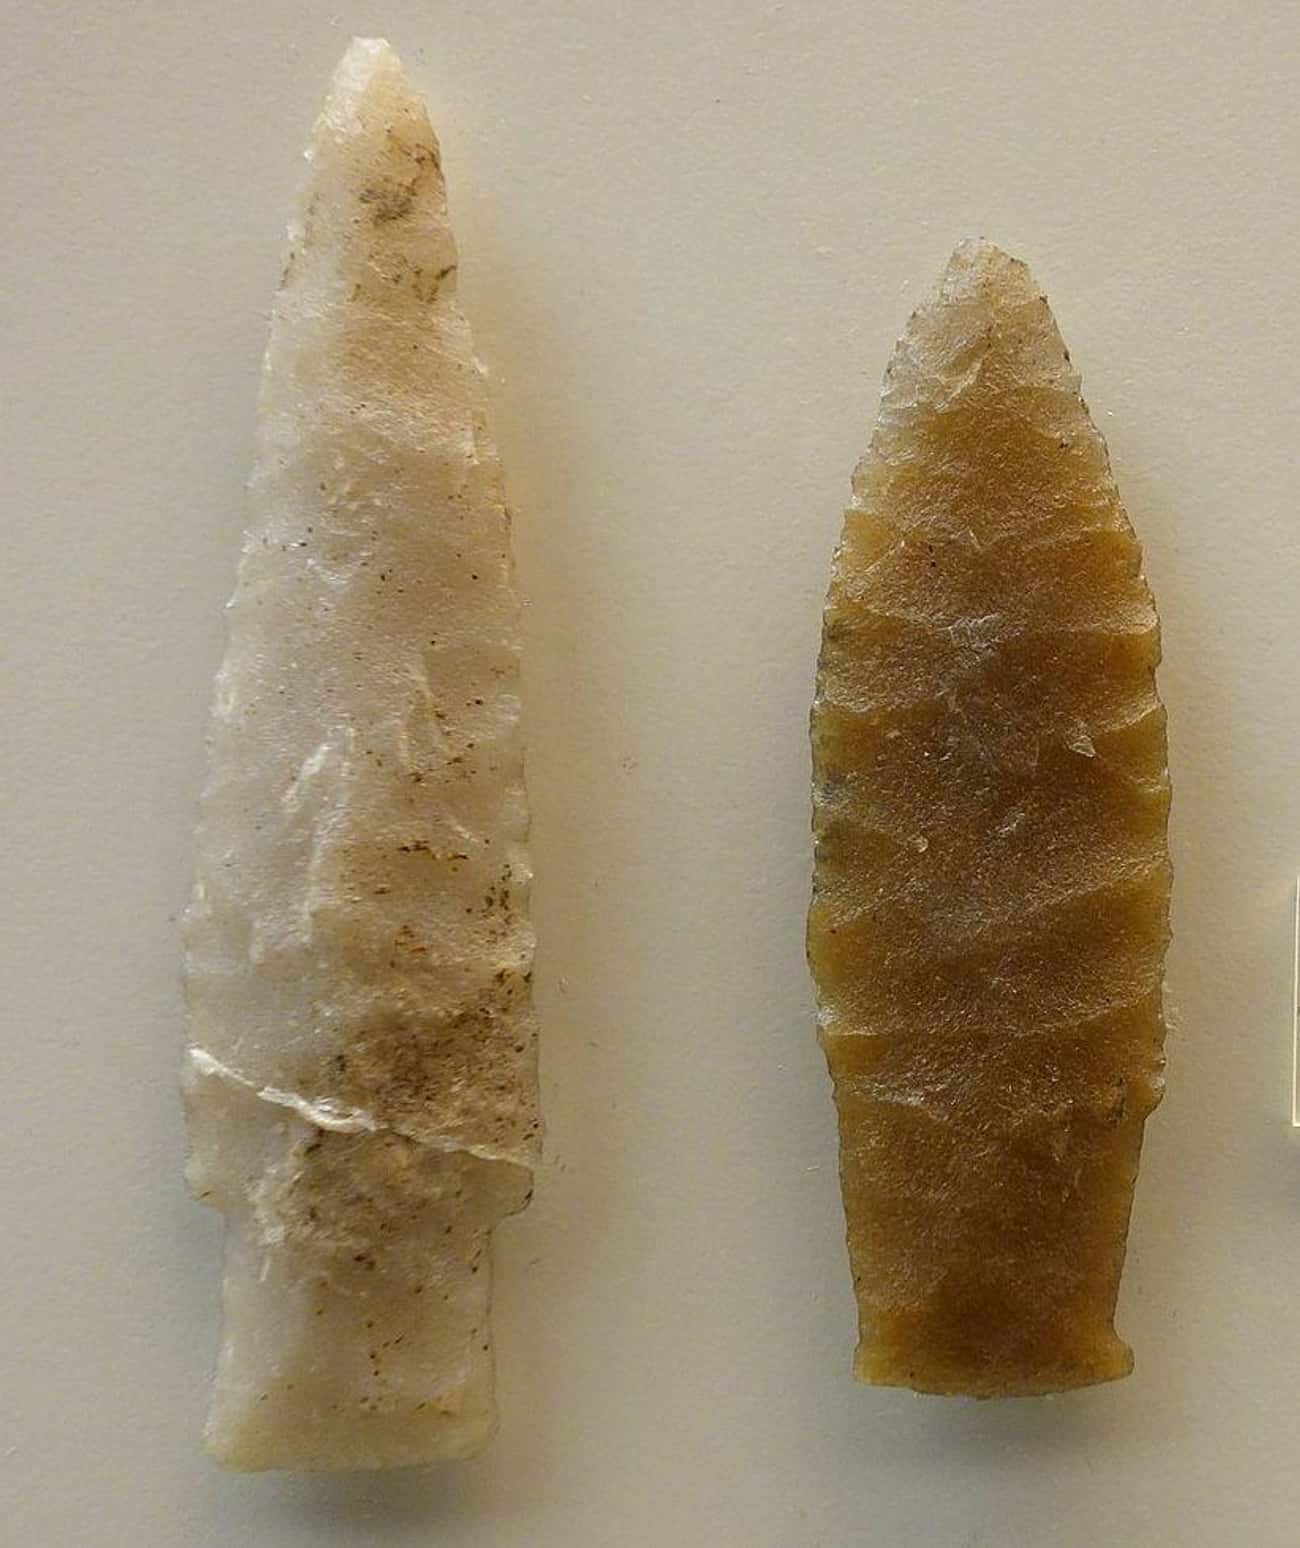 Spear Tips In South Africa Suggest Human Ancestors Made Tools 250,000 Years Earlier Than Previously Thought